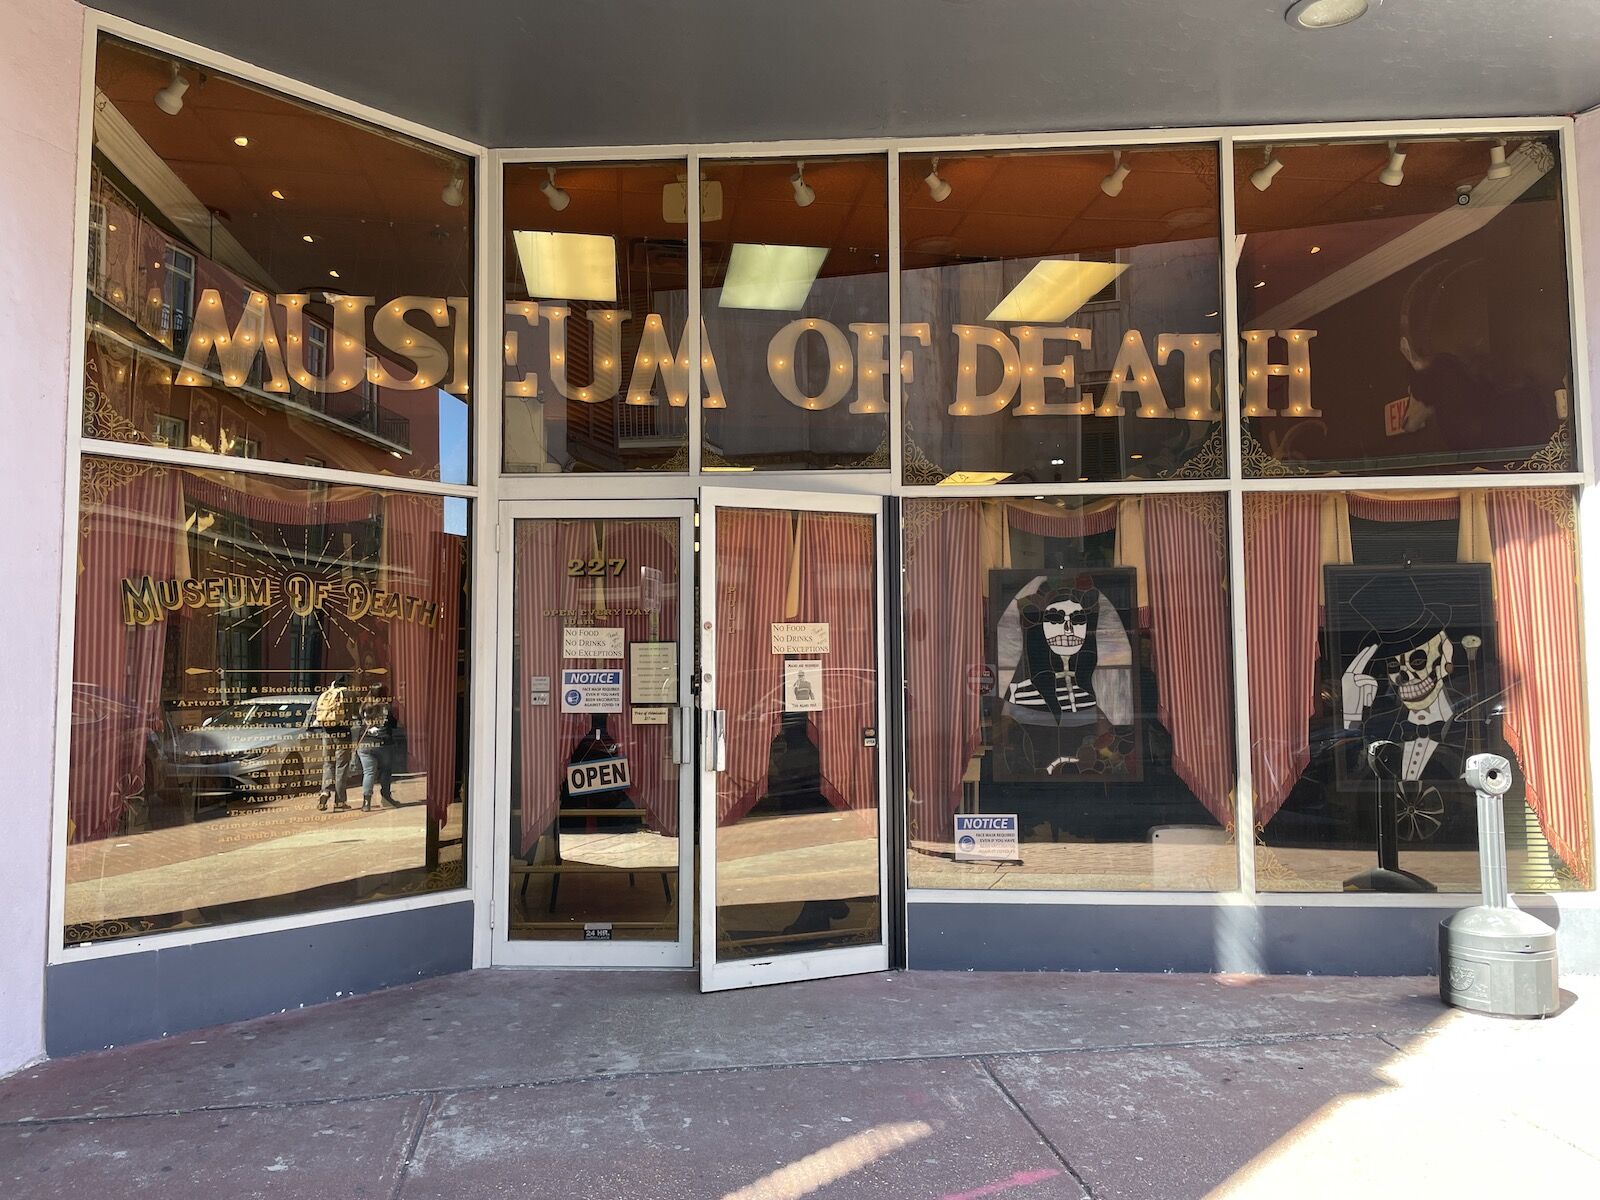 Facade of the Museum of Death in New Orleans.